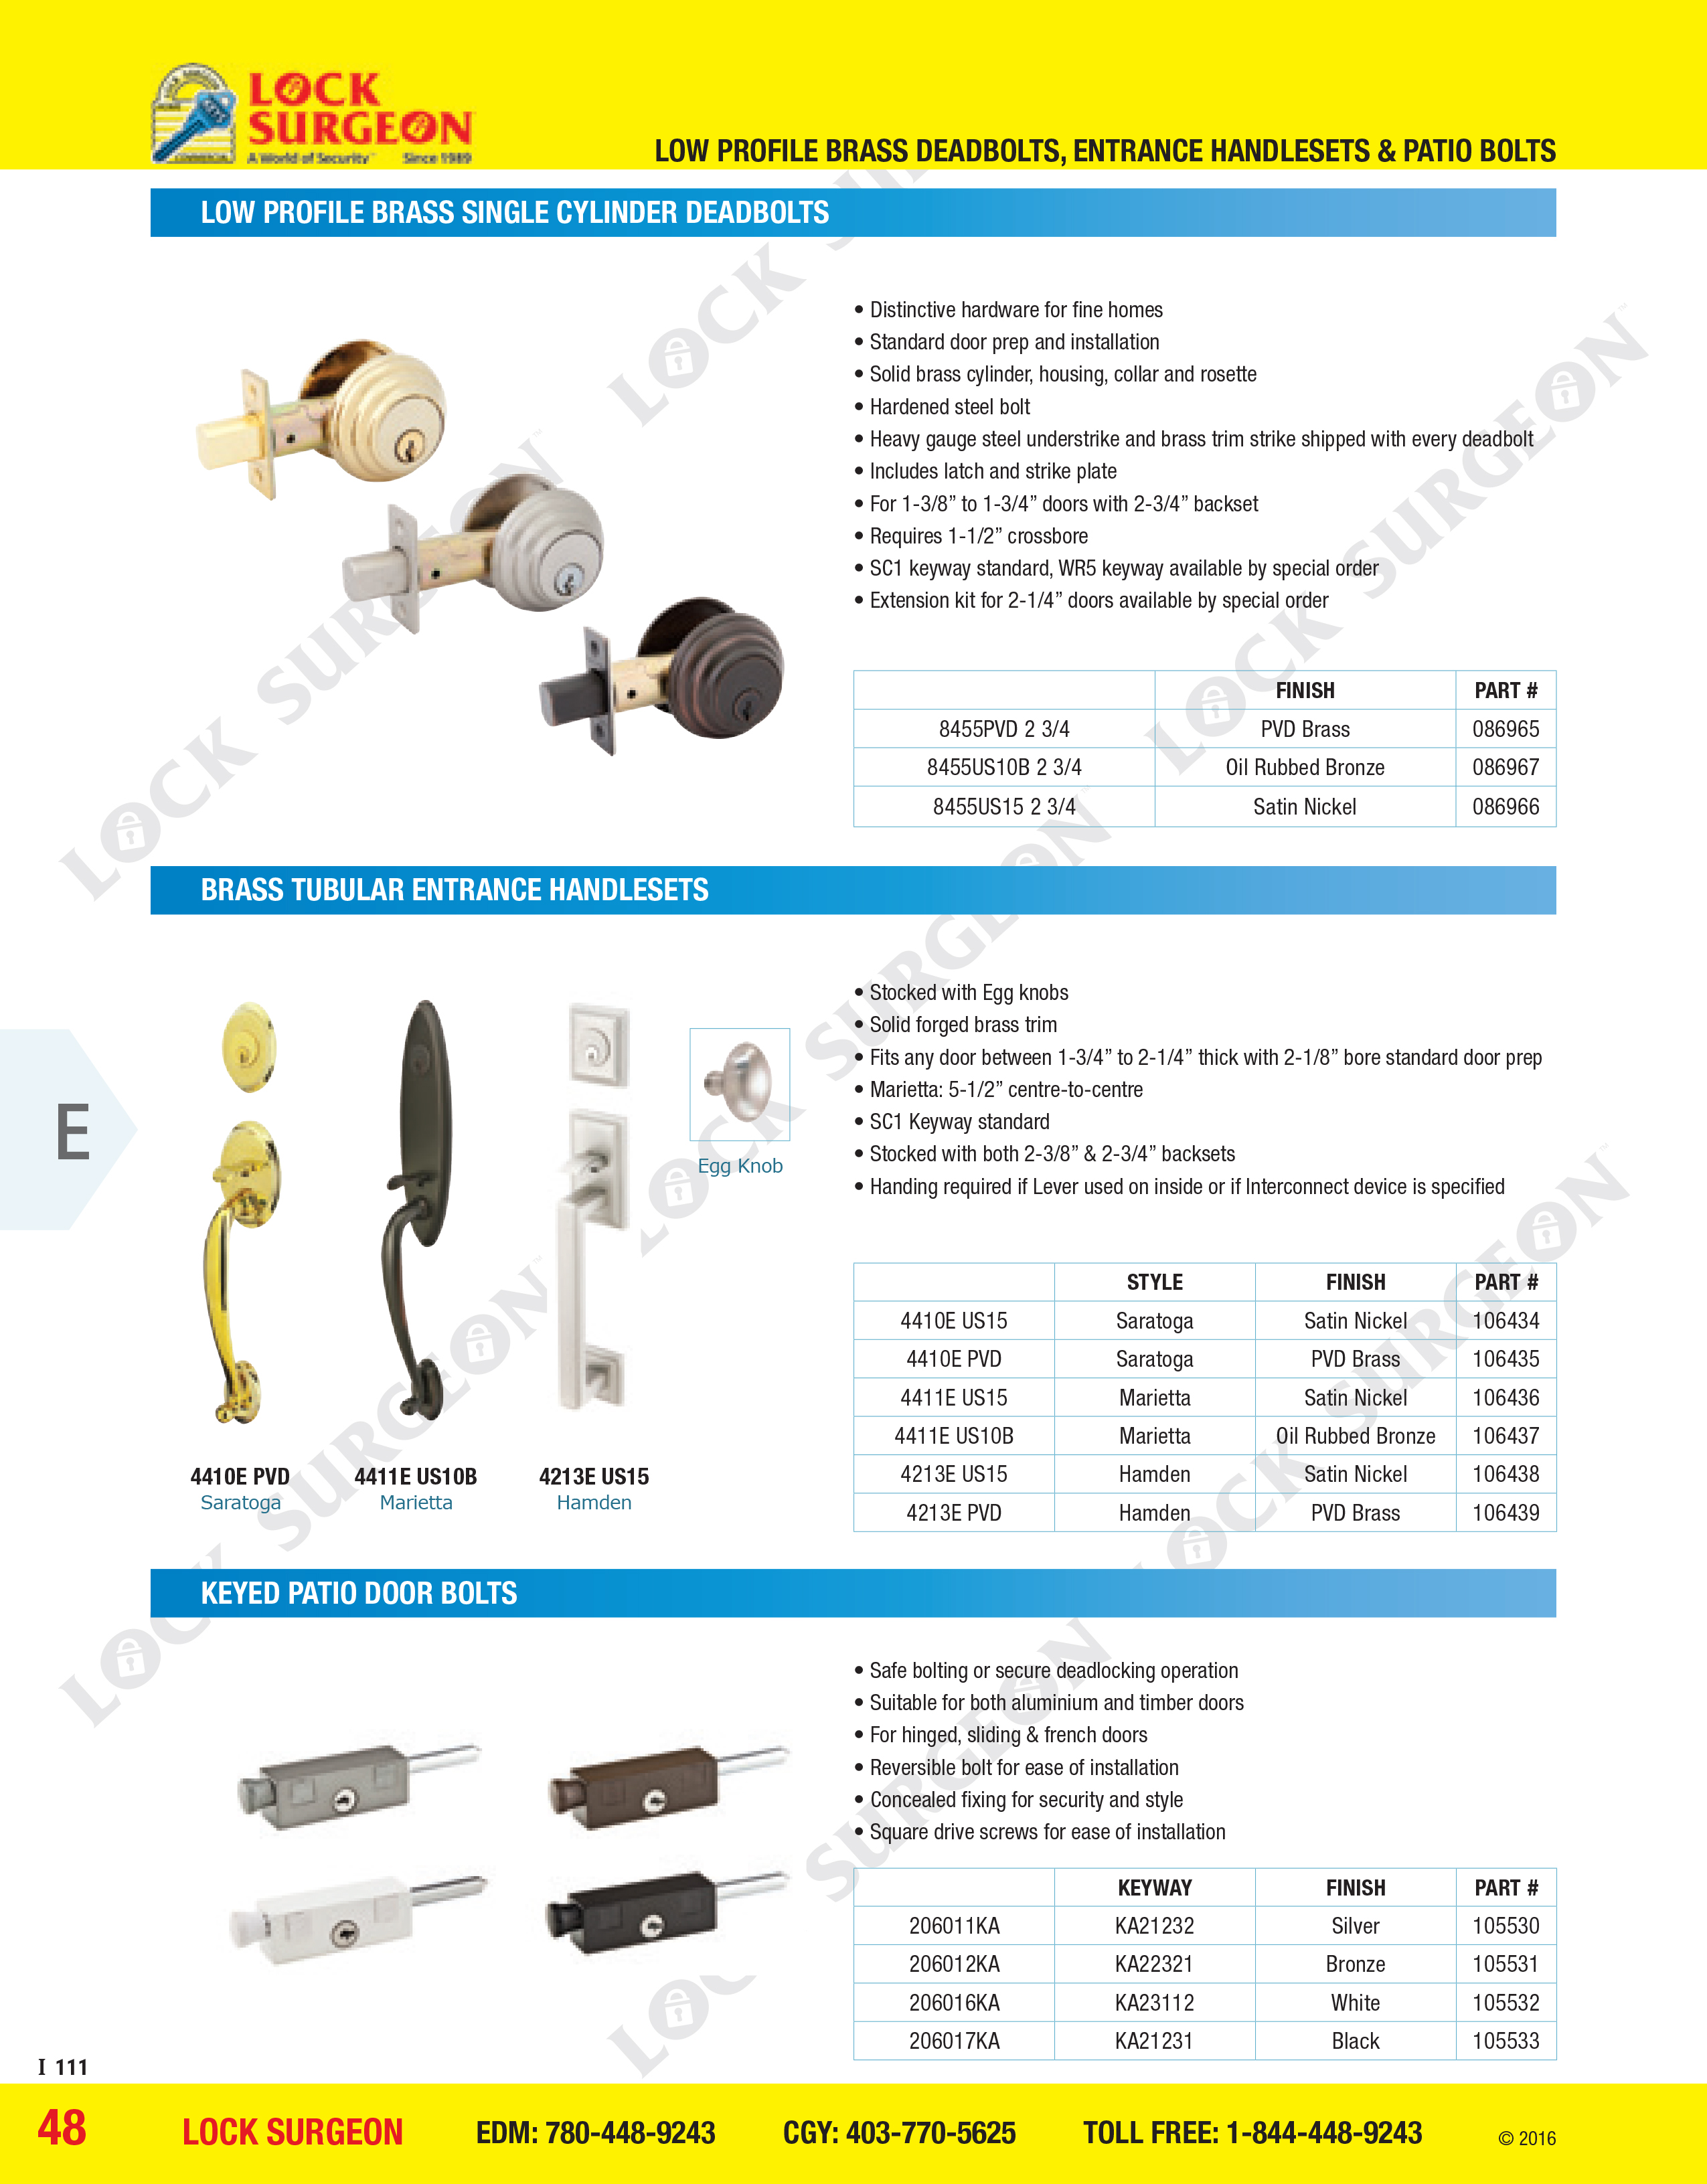 Schlage deadbolts & handles made for style & function & Secondary locking Patio door pins.